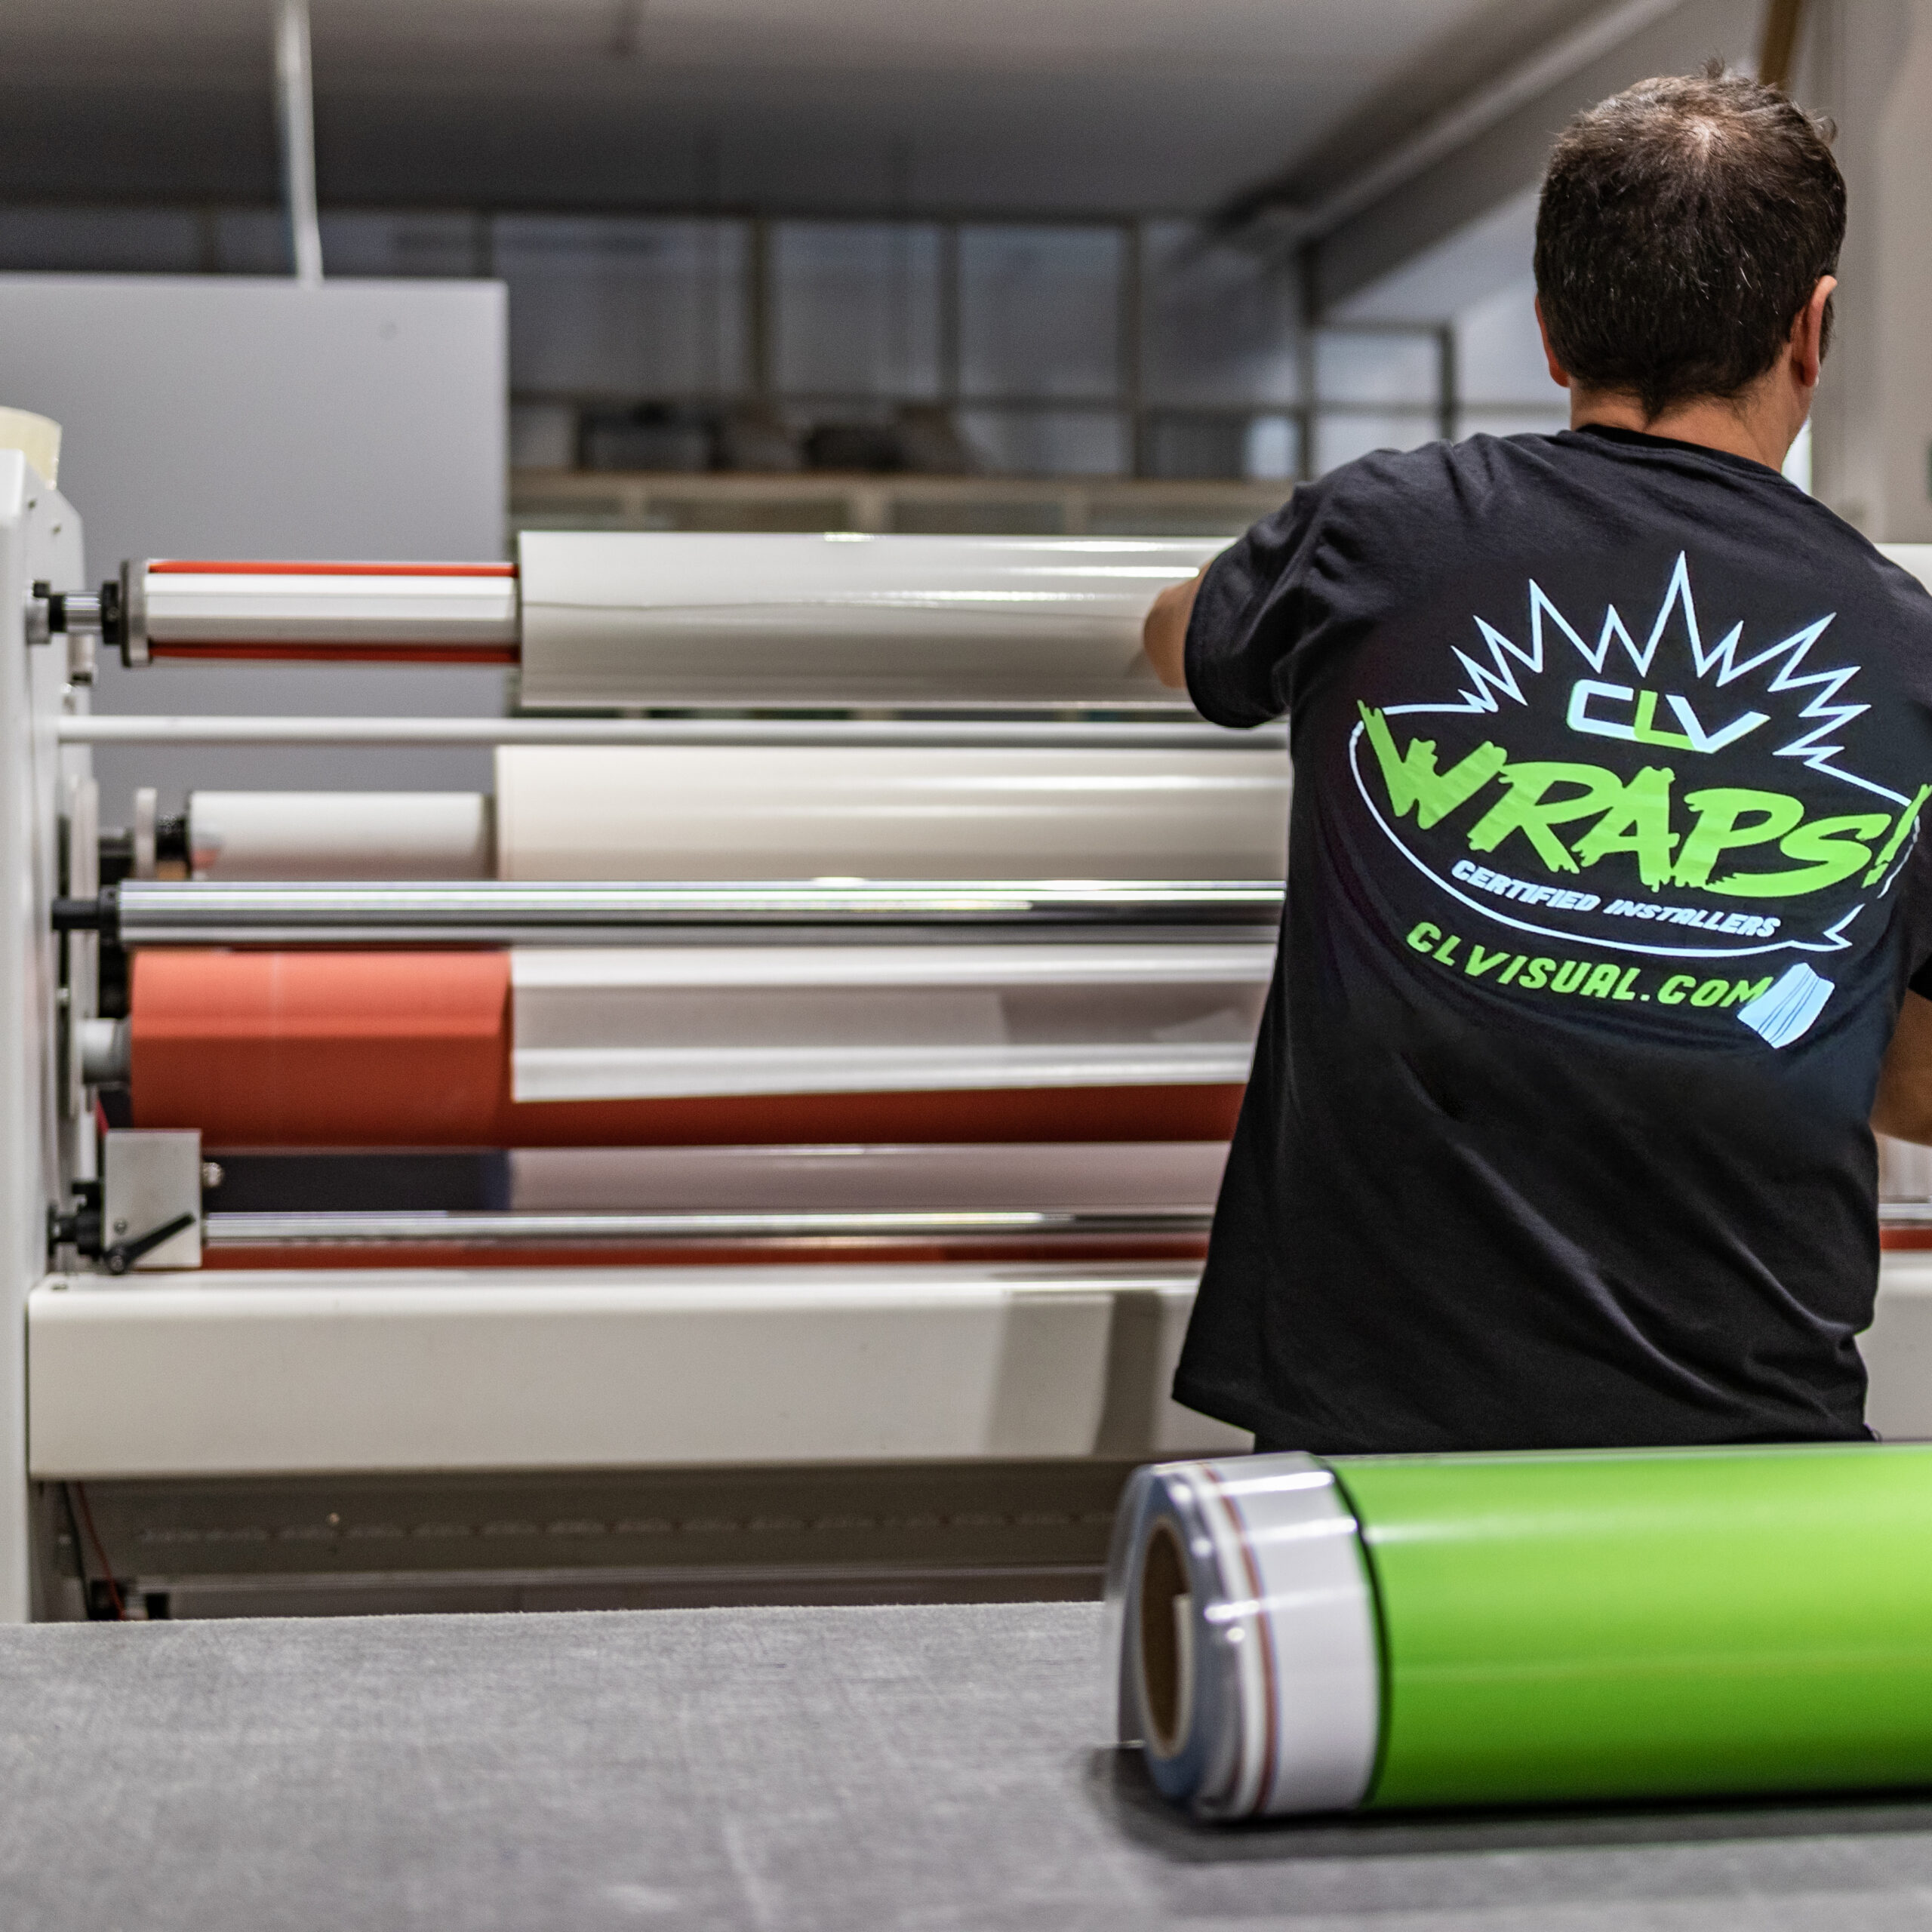 Specialized staff working big vinyl rolls on a professional printing machine and laminator. Details of the preparation and paper feed. White tubes, industrial workplace, occupation concept.